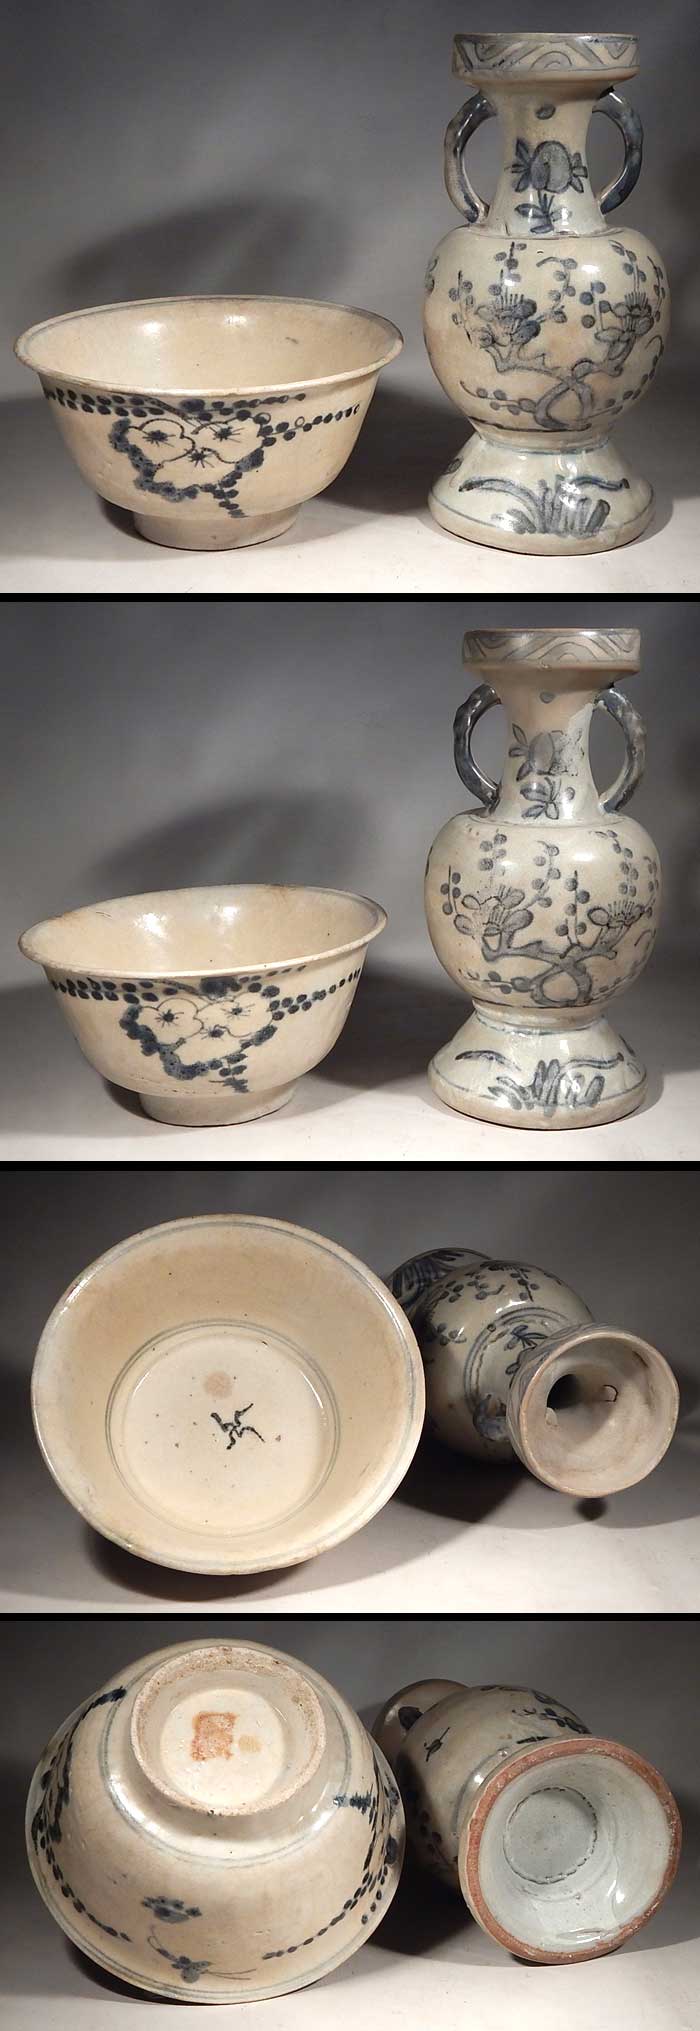 Late Ming Dynasty Early Qing Dynasty Bowl and Vase